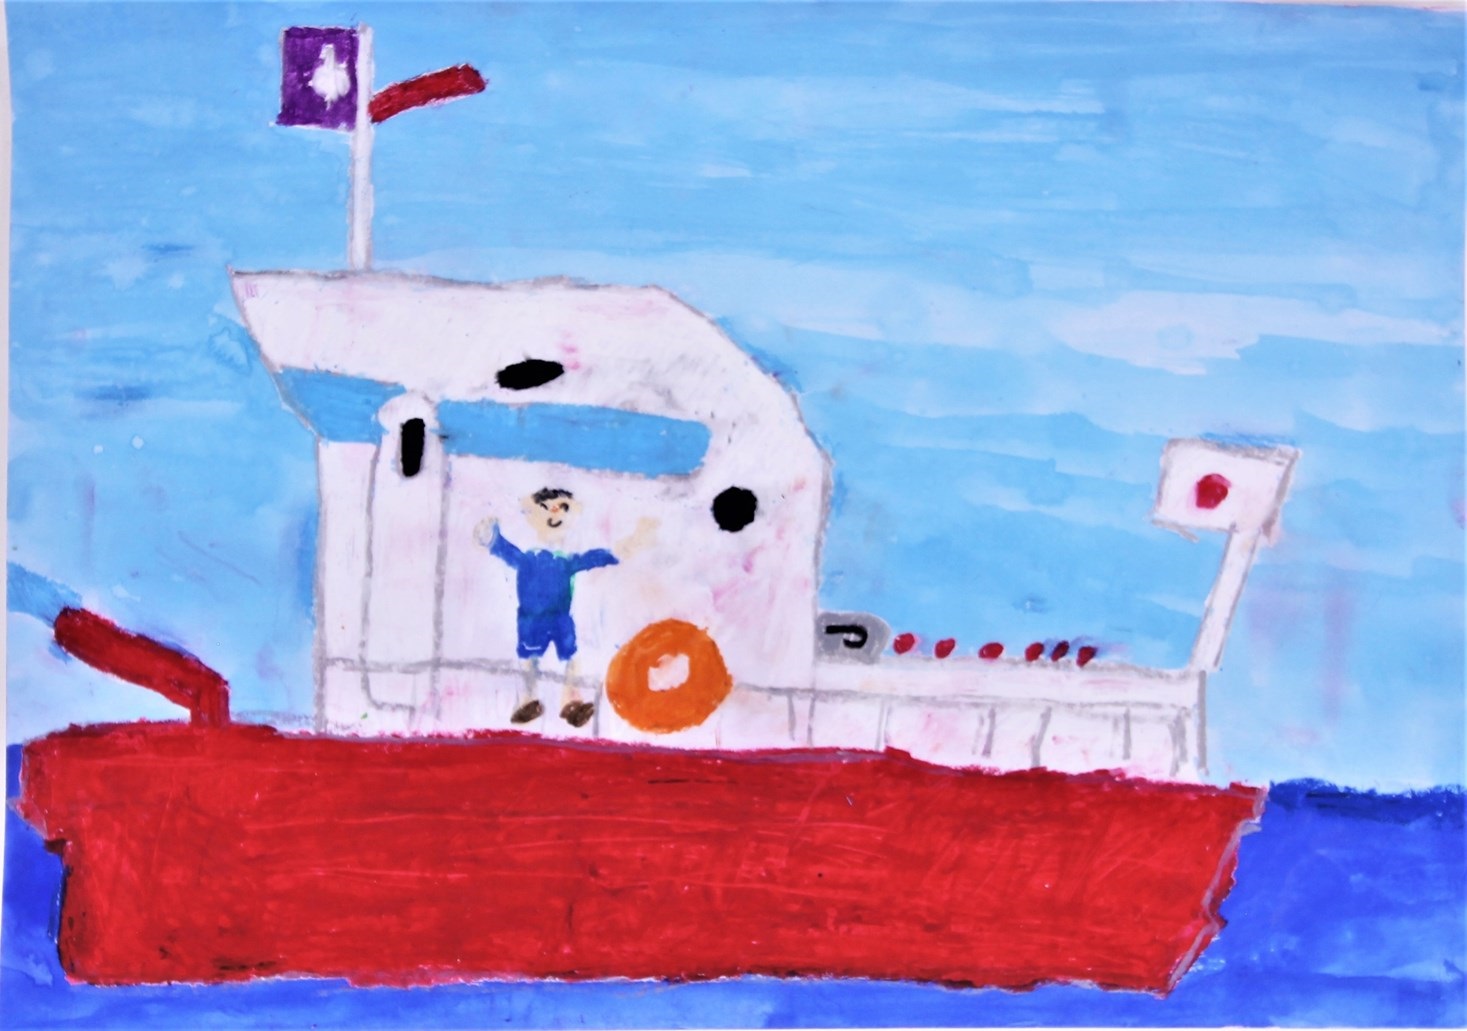 Judging children's pictures of fire fighting